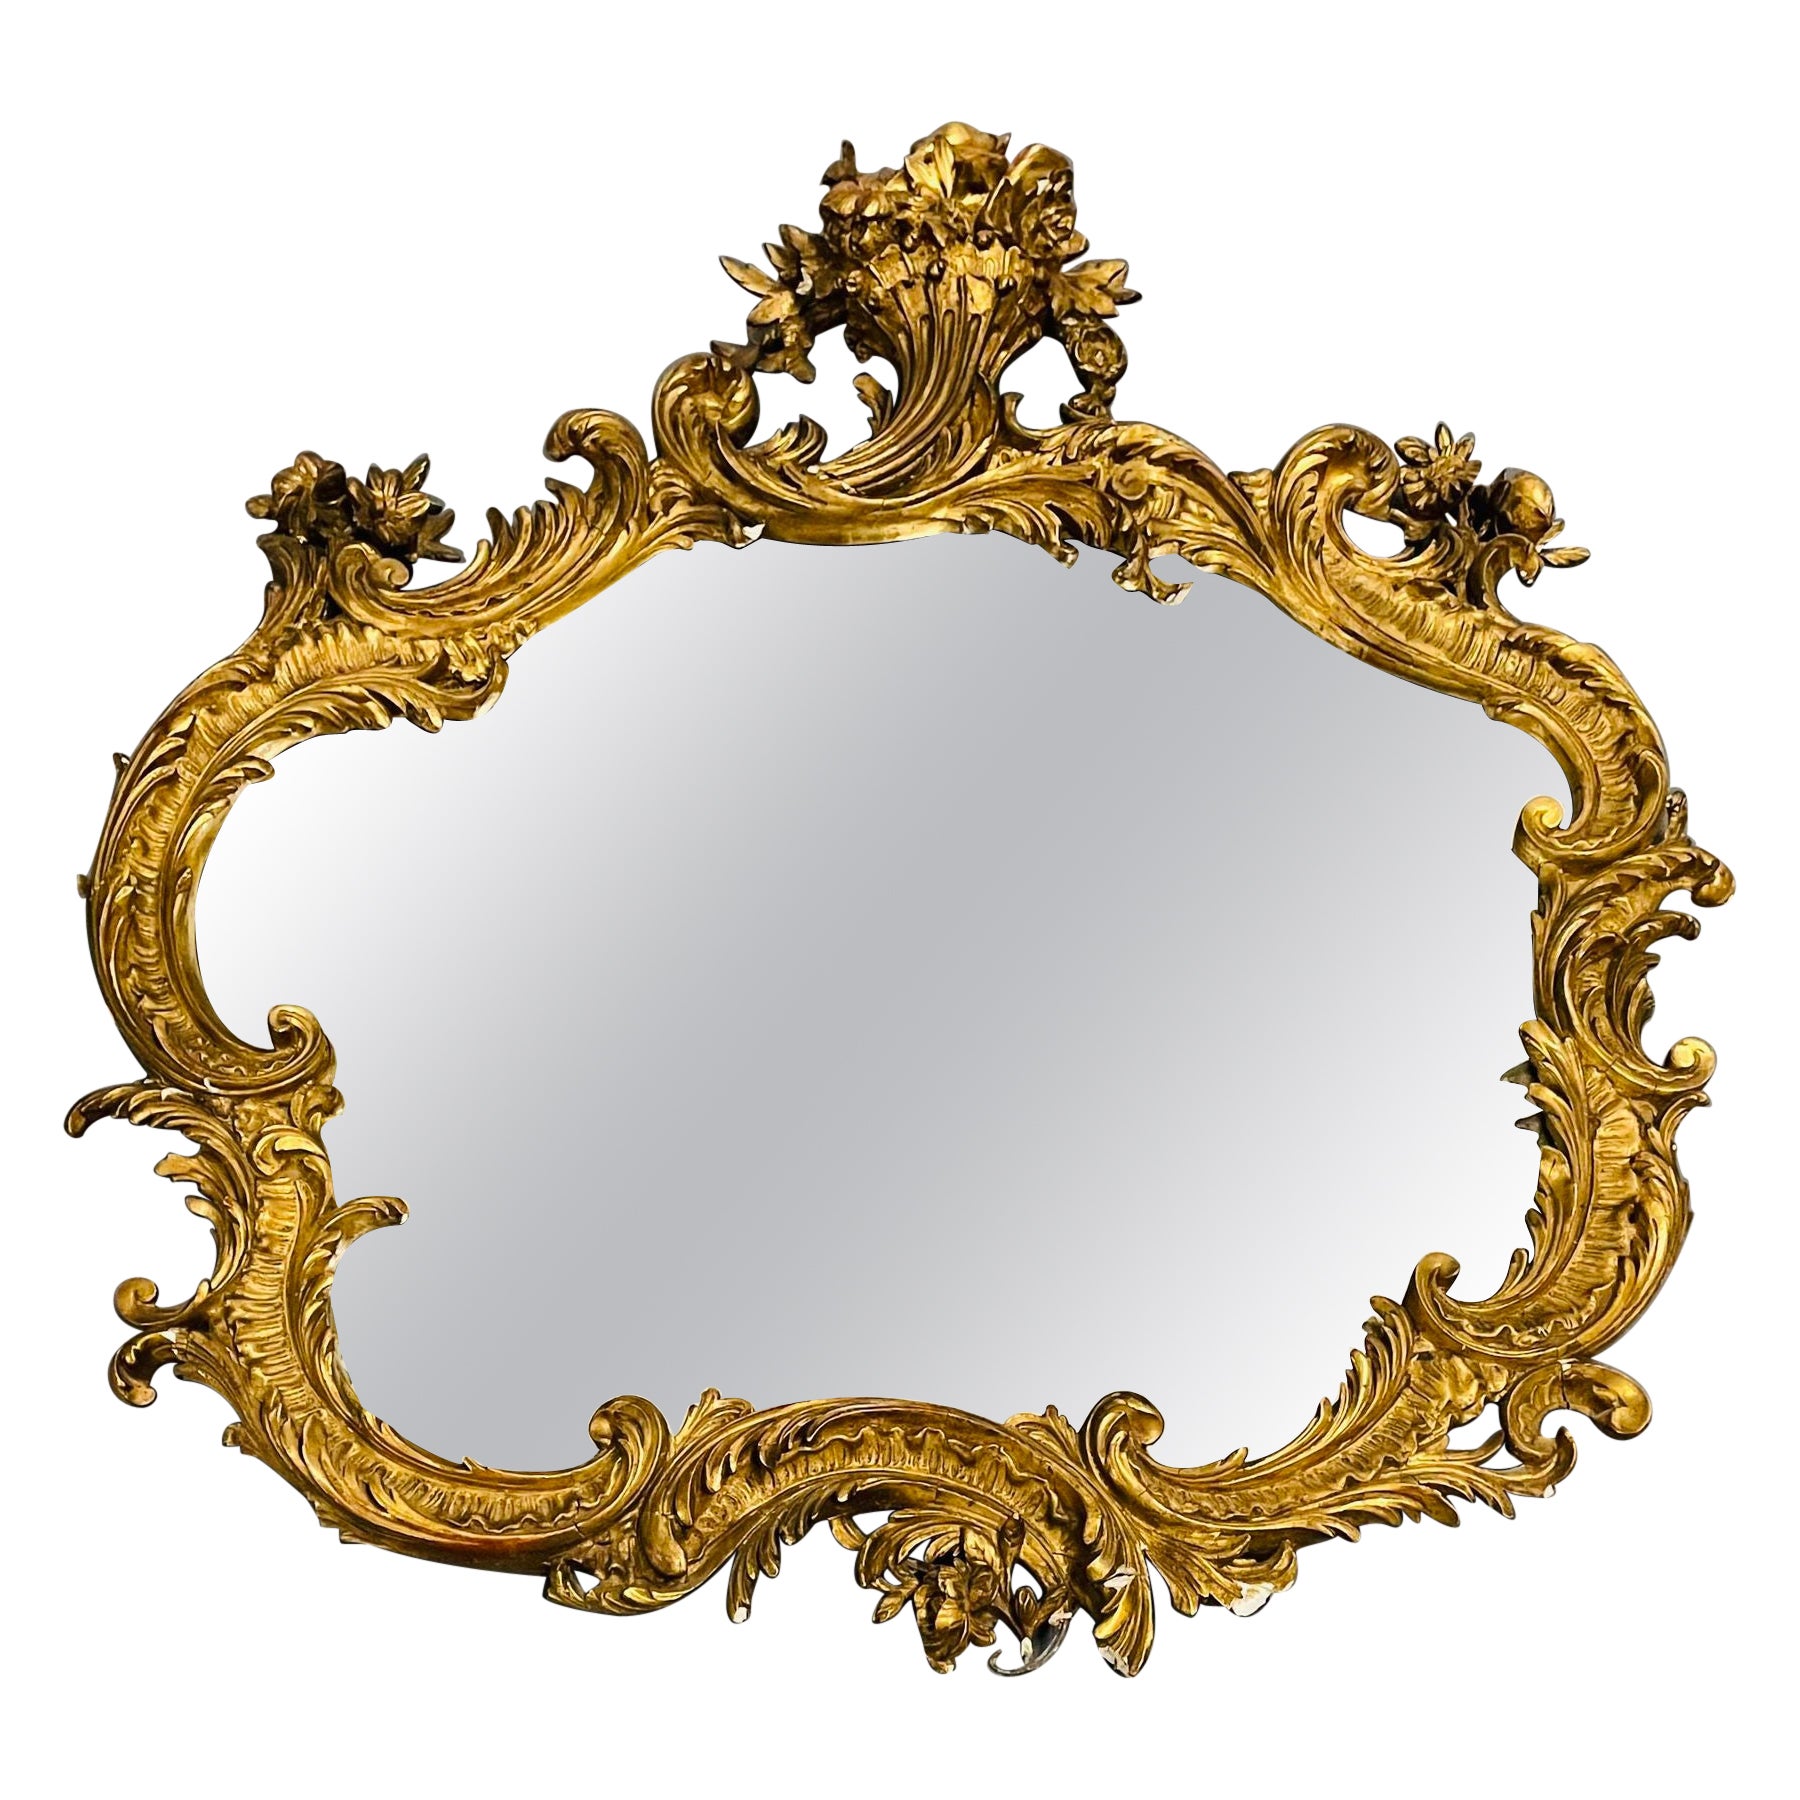 19th-20th Century Giltwood French Mirror, Wall or Console, Floral Decorated